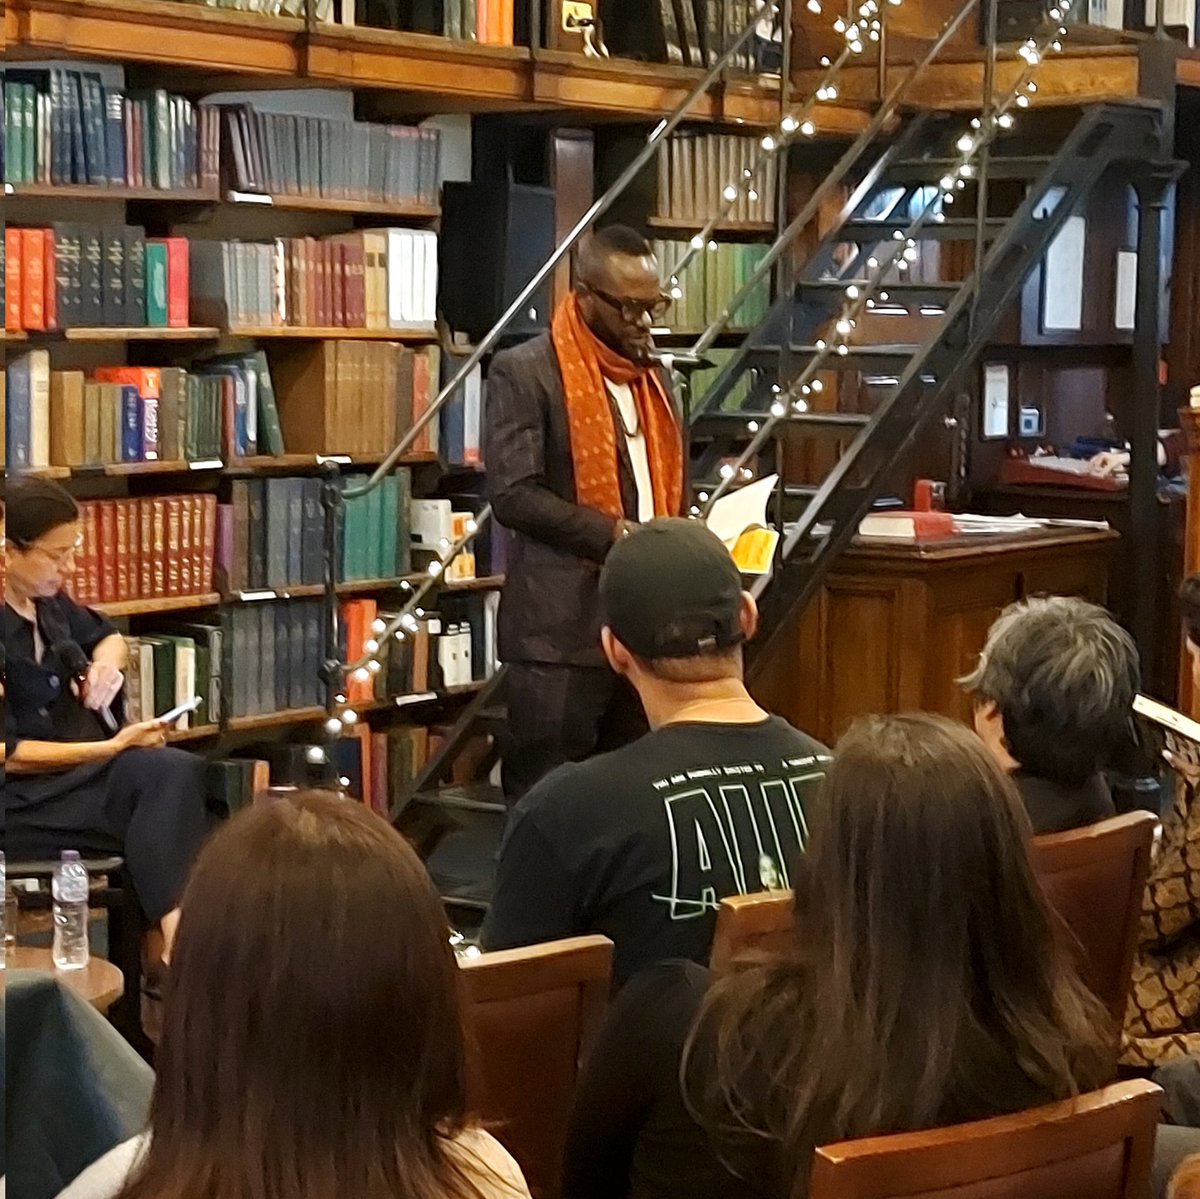 Poetry represented at @jhalakprize readings @TheLondonLib with the wonderful @jallenpaisant reading from his shortlisted collection 'Self-Portrait as Othello'.